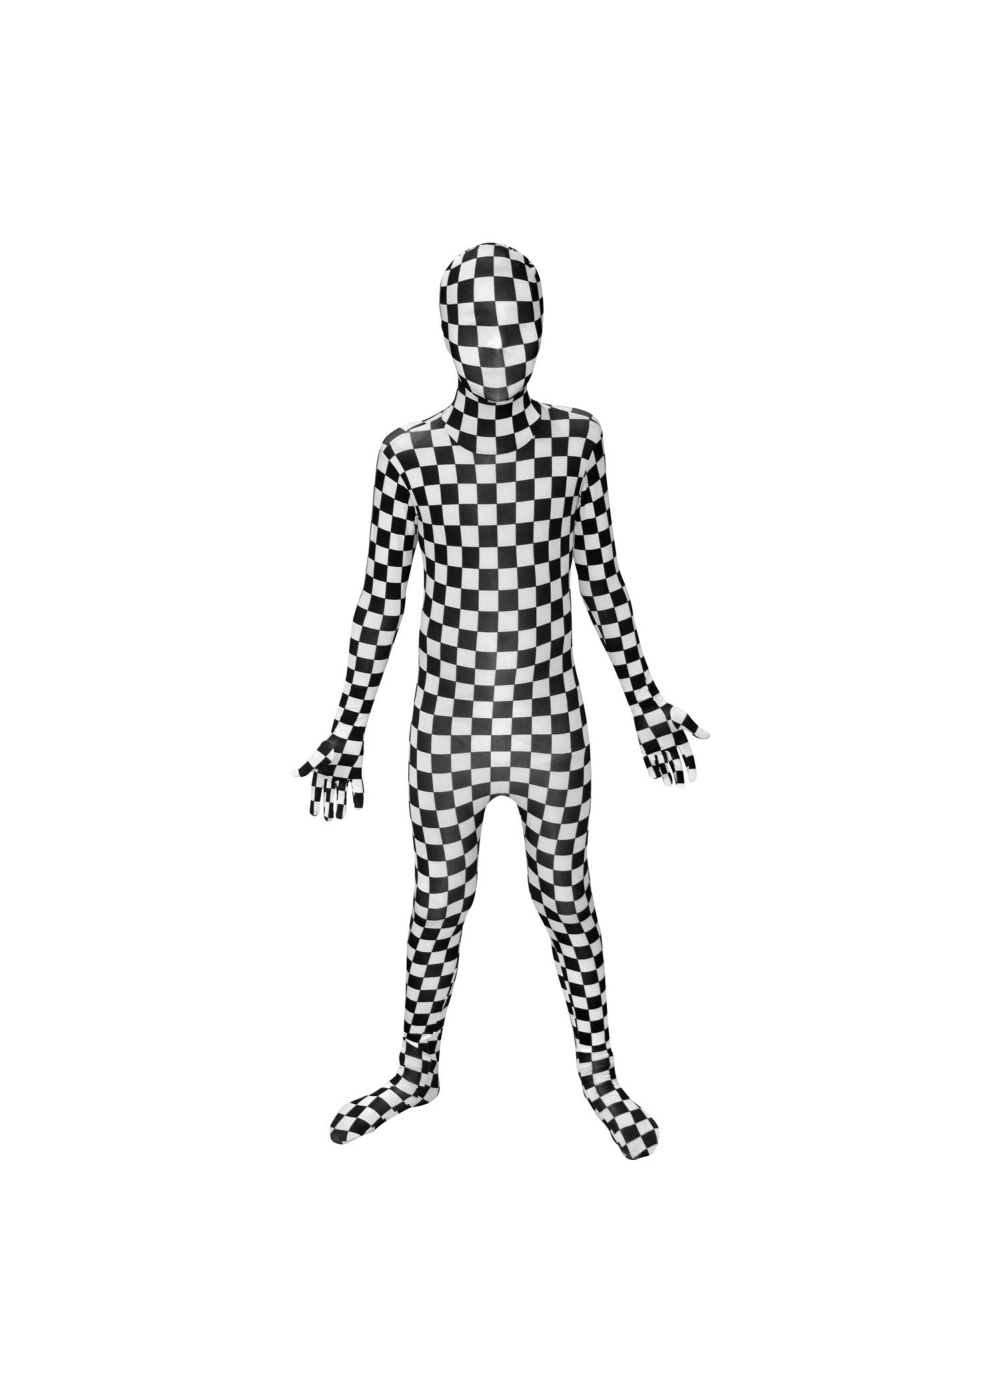 Bw Checkerboard Morphsuit Boys Costume